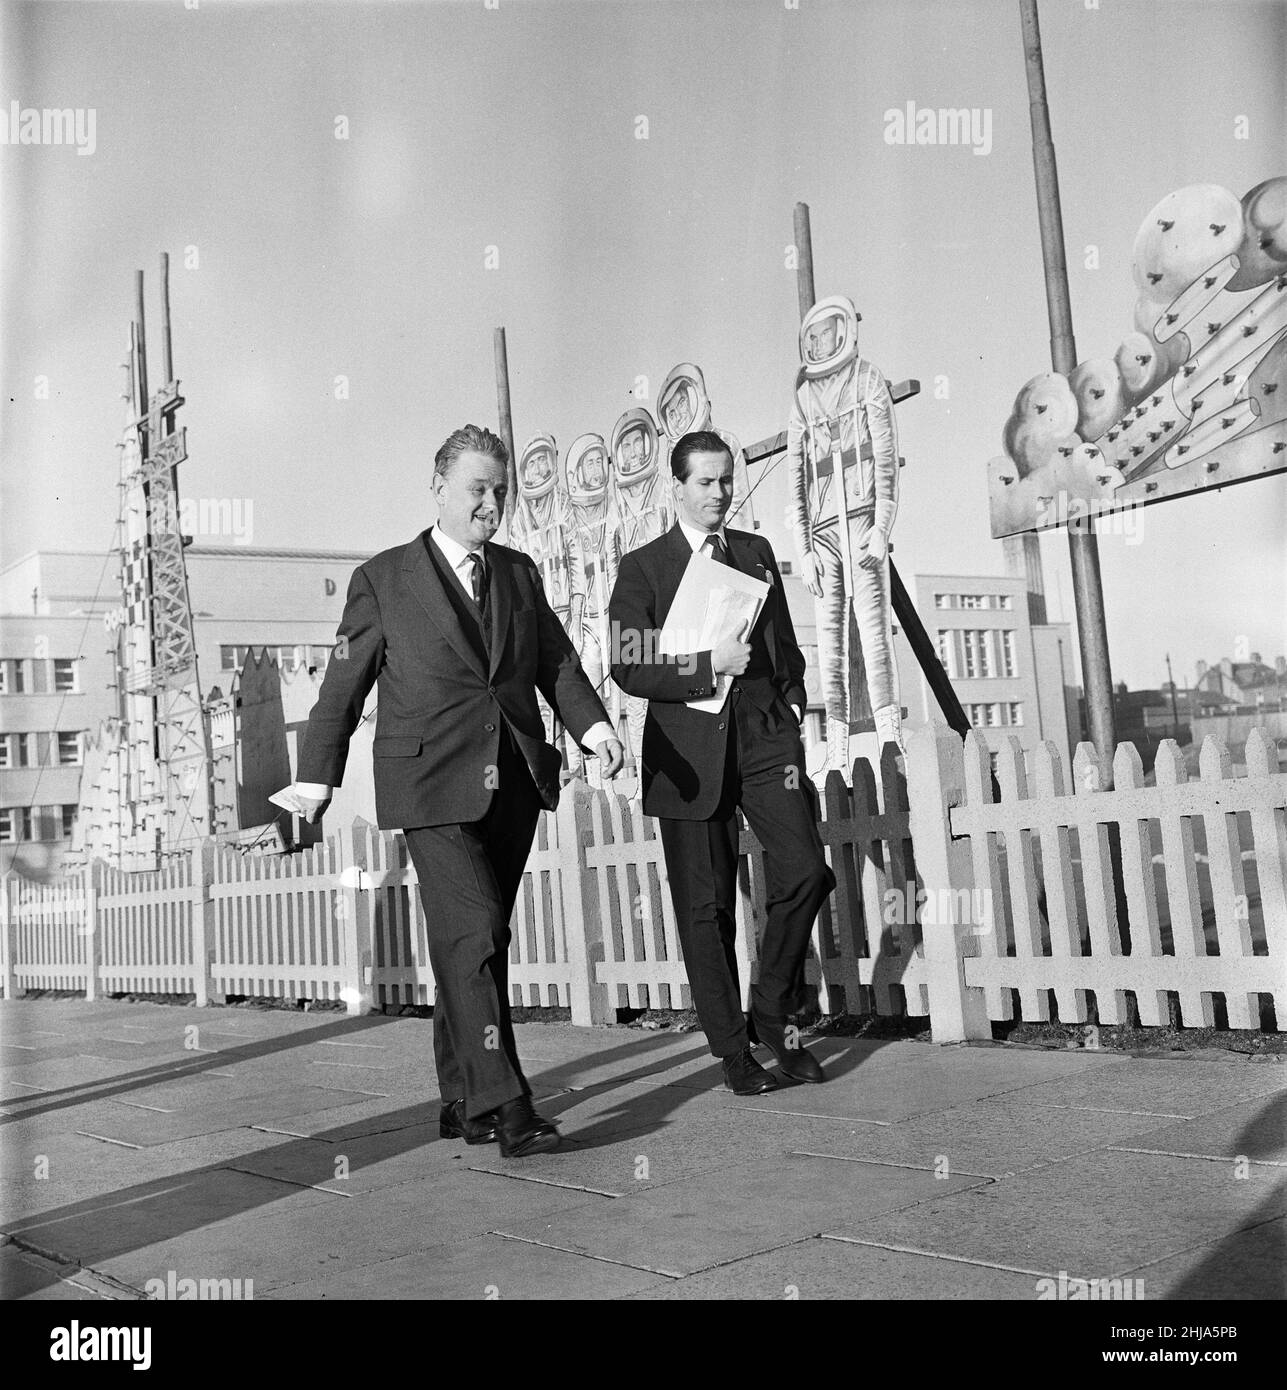 The Conservative Party Conference in Blackpool. Quintin Hogg, Lord Hailsham, takes a stroll along the front with his ex-personal secretary Dennis Walters, a delegate for Wiltshire East after an afternoon of top level discussions. They walk past Russian Spacemen - an illuminations setpiece. 11th October 1963. Stock Photo